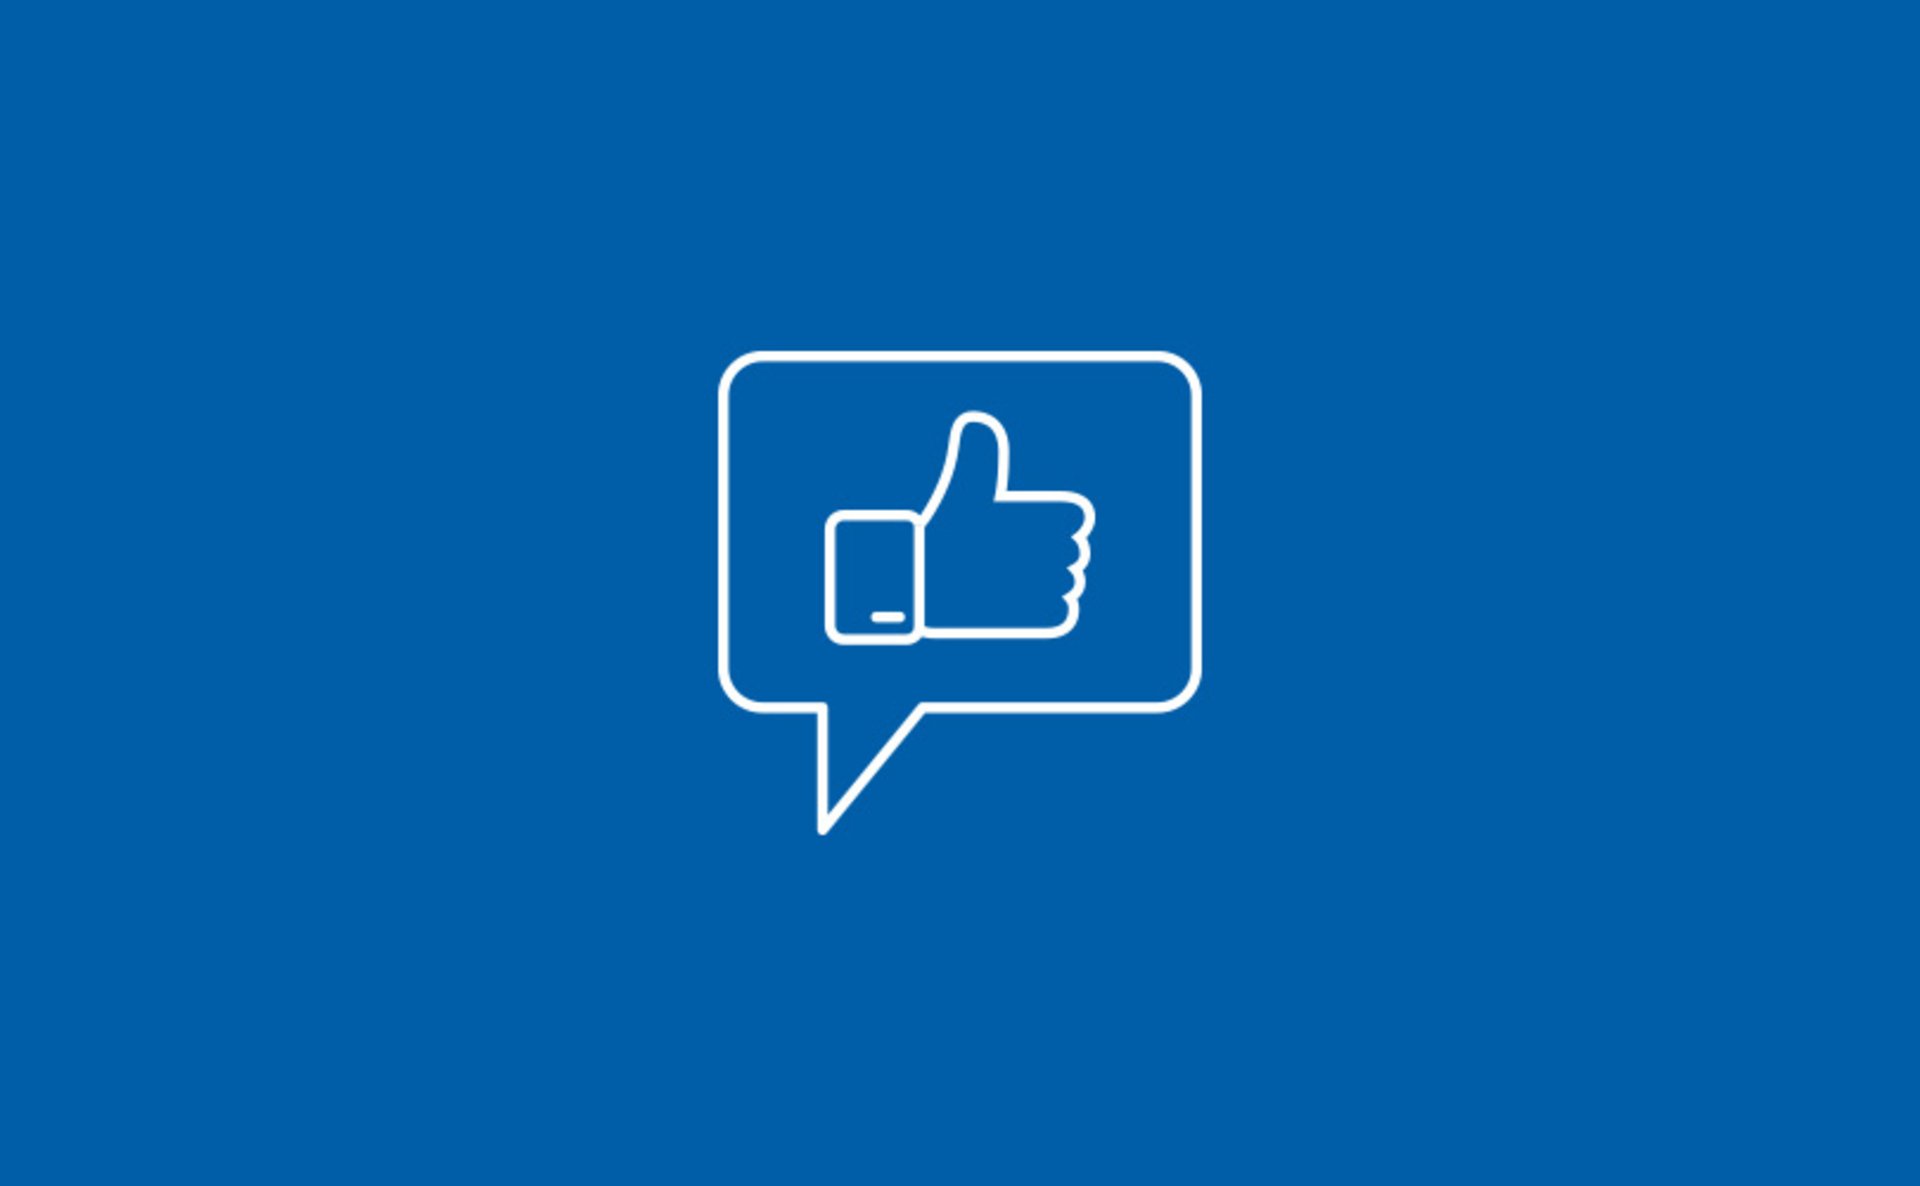 Icon thumbs up in speech bubble